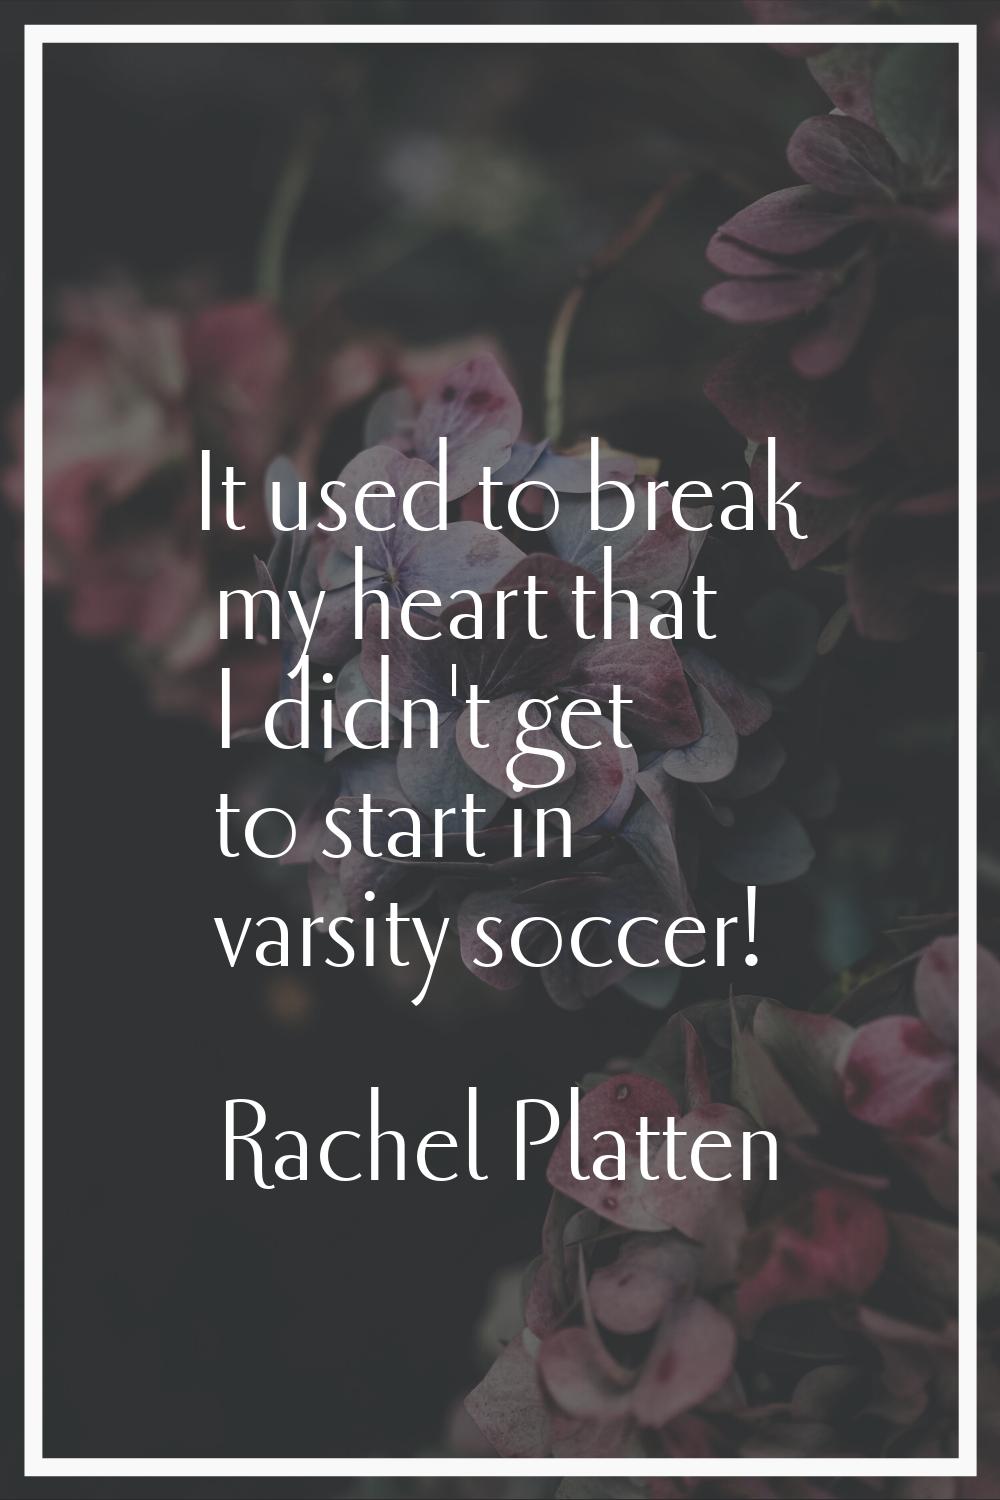 It used to break my heart that I didn't get to start in varsity soccer!